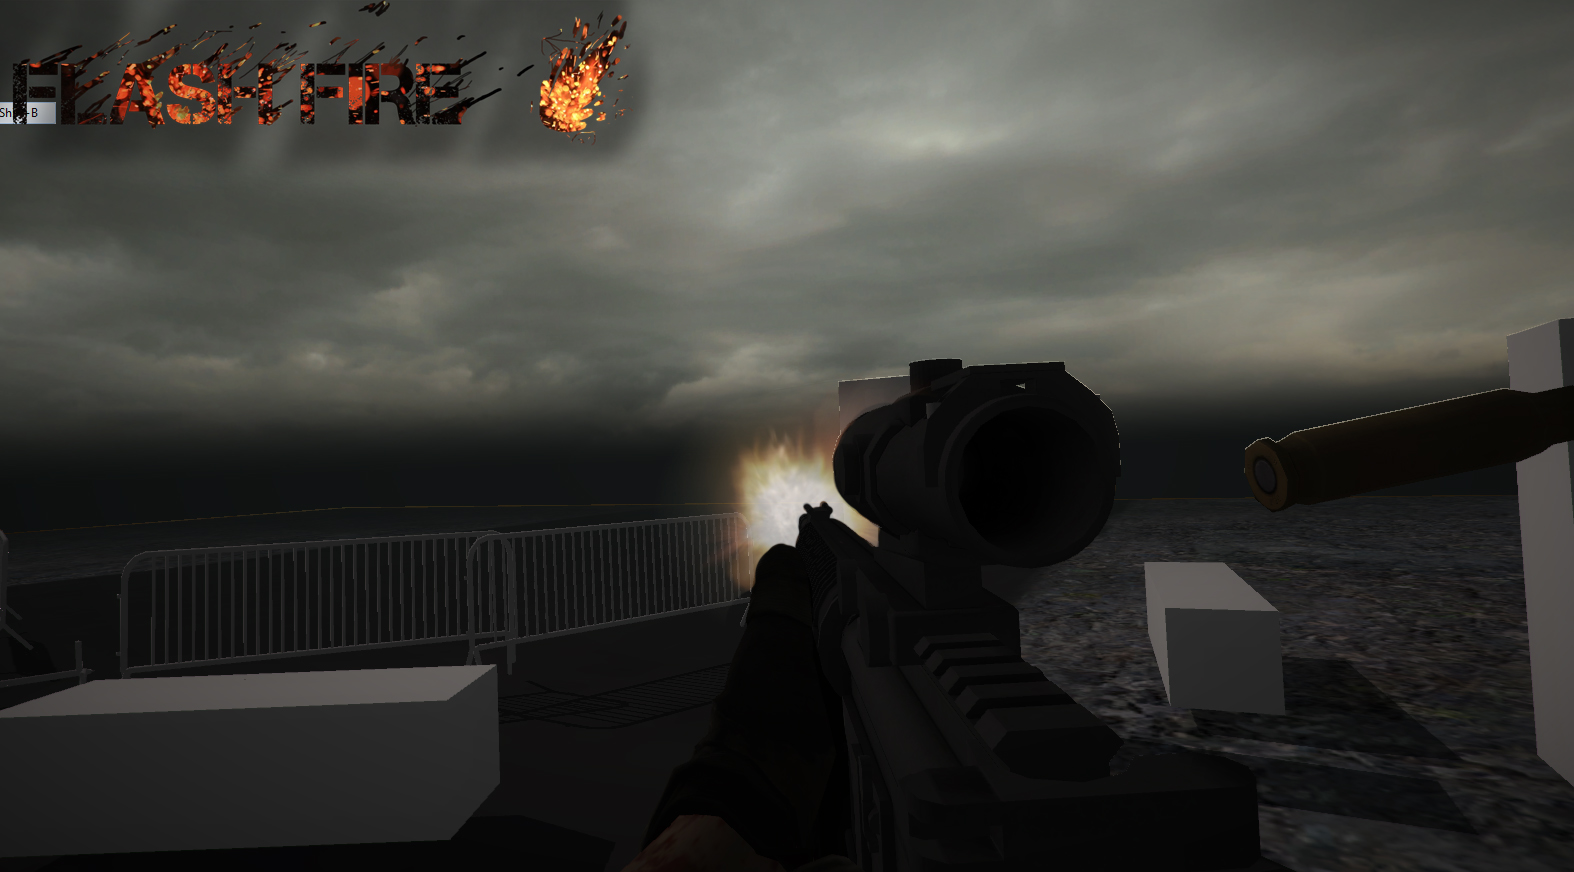 New FPS Camera view image - FLASH FIRE